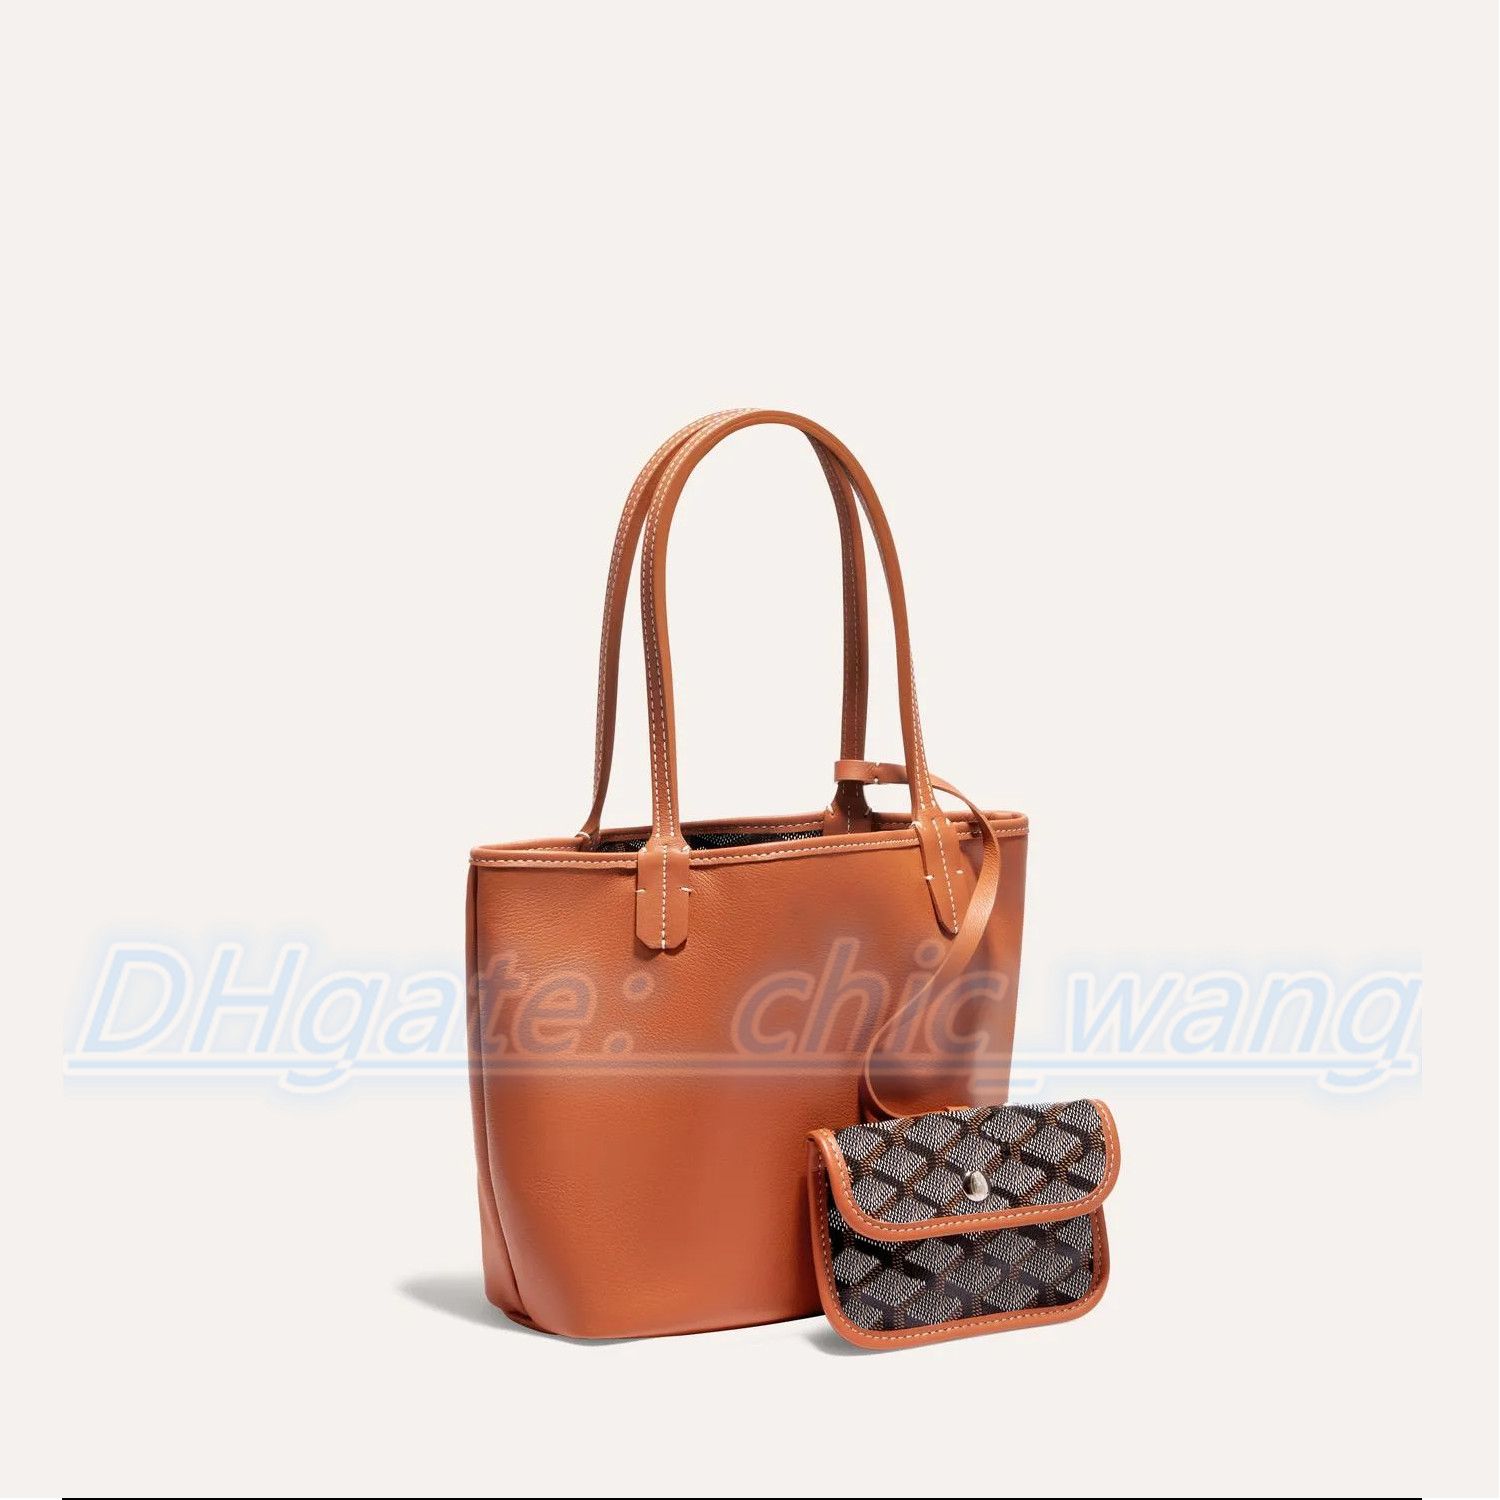 Please recommend a good and trusted Dhgate seller for this bag